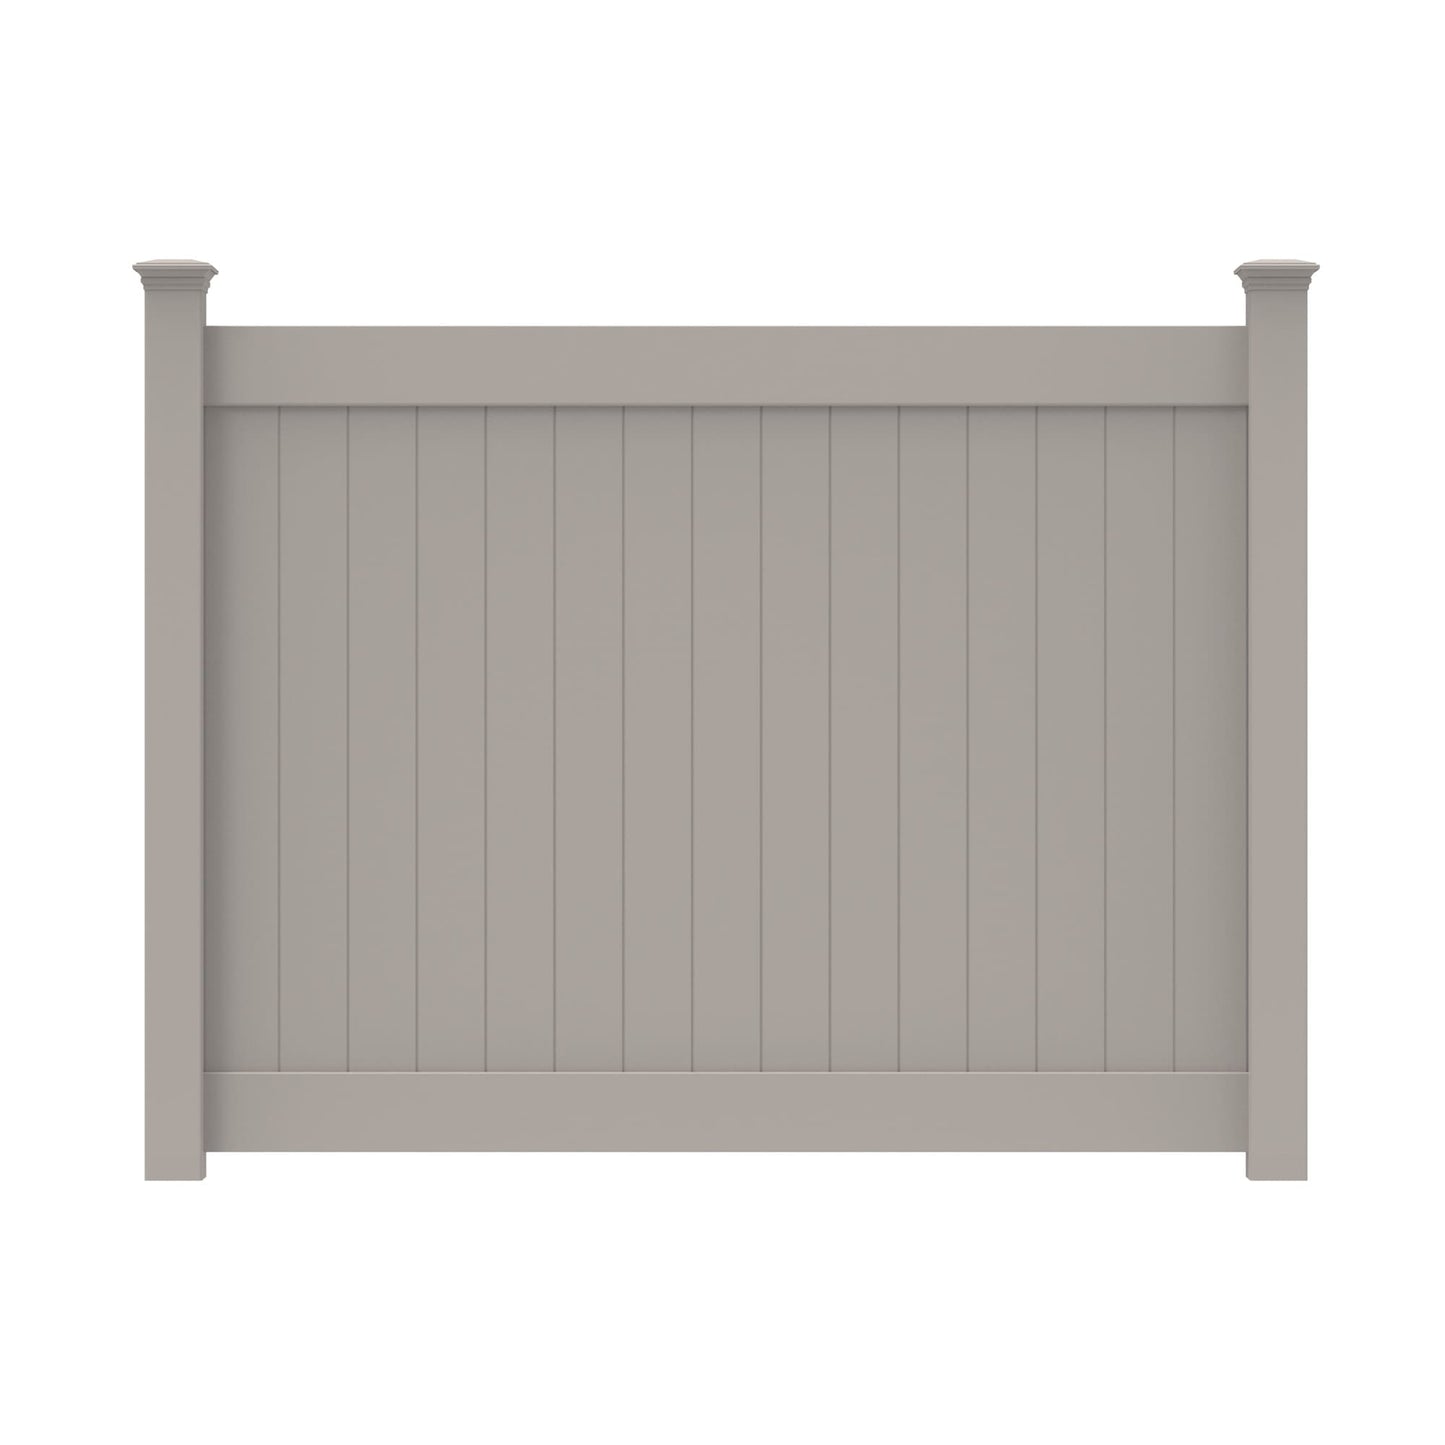 Dogwood Home Series - Fence Panel - 6' x 8'-Vinyl Fence Panels-ActiveYards-Gray-FenceCenter